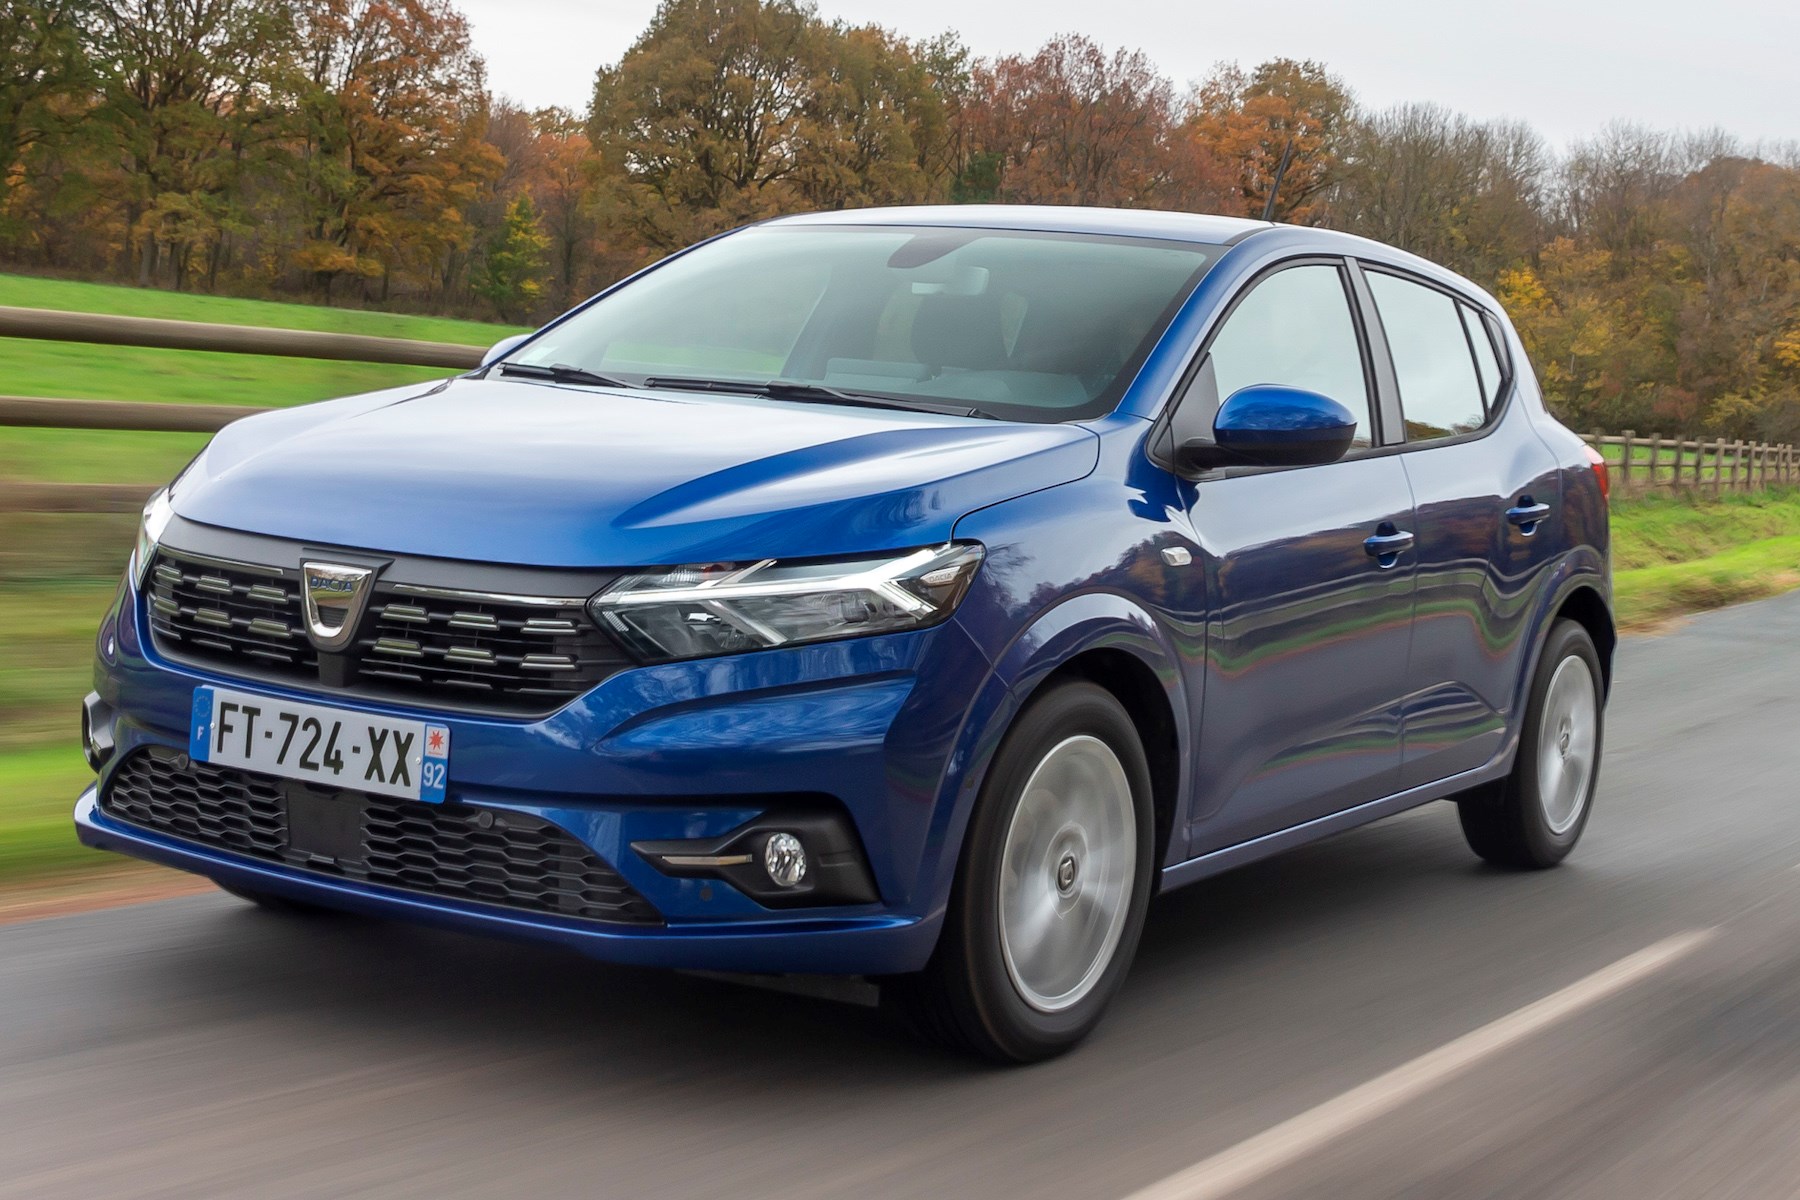 2021 Dacia Sandero, Logan Revealed With Modern Comfort And Safety Tech